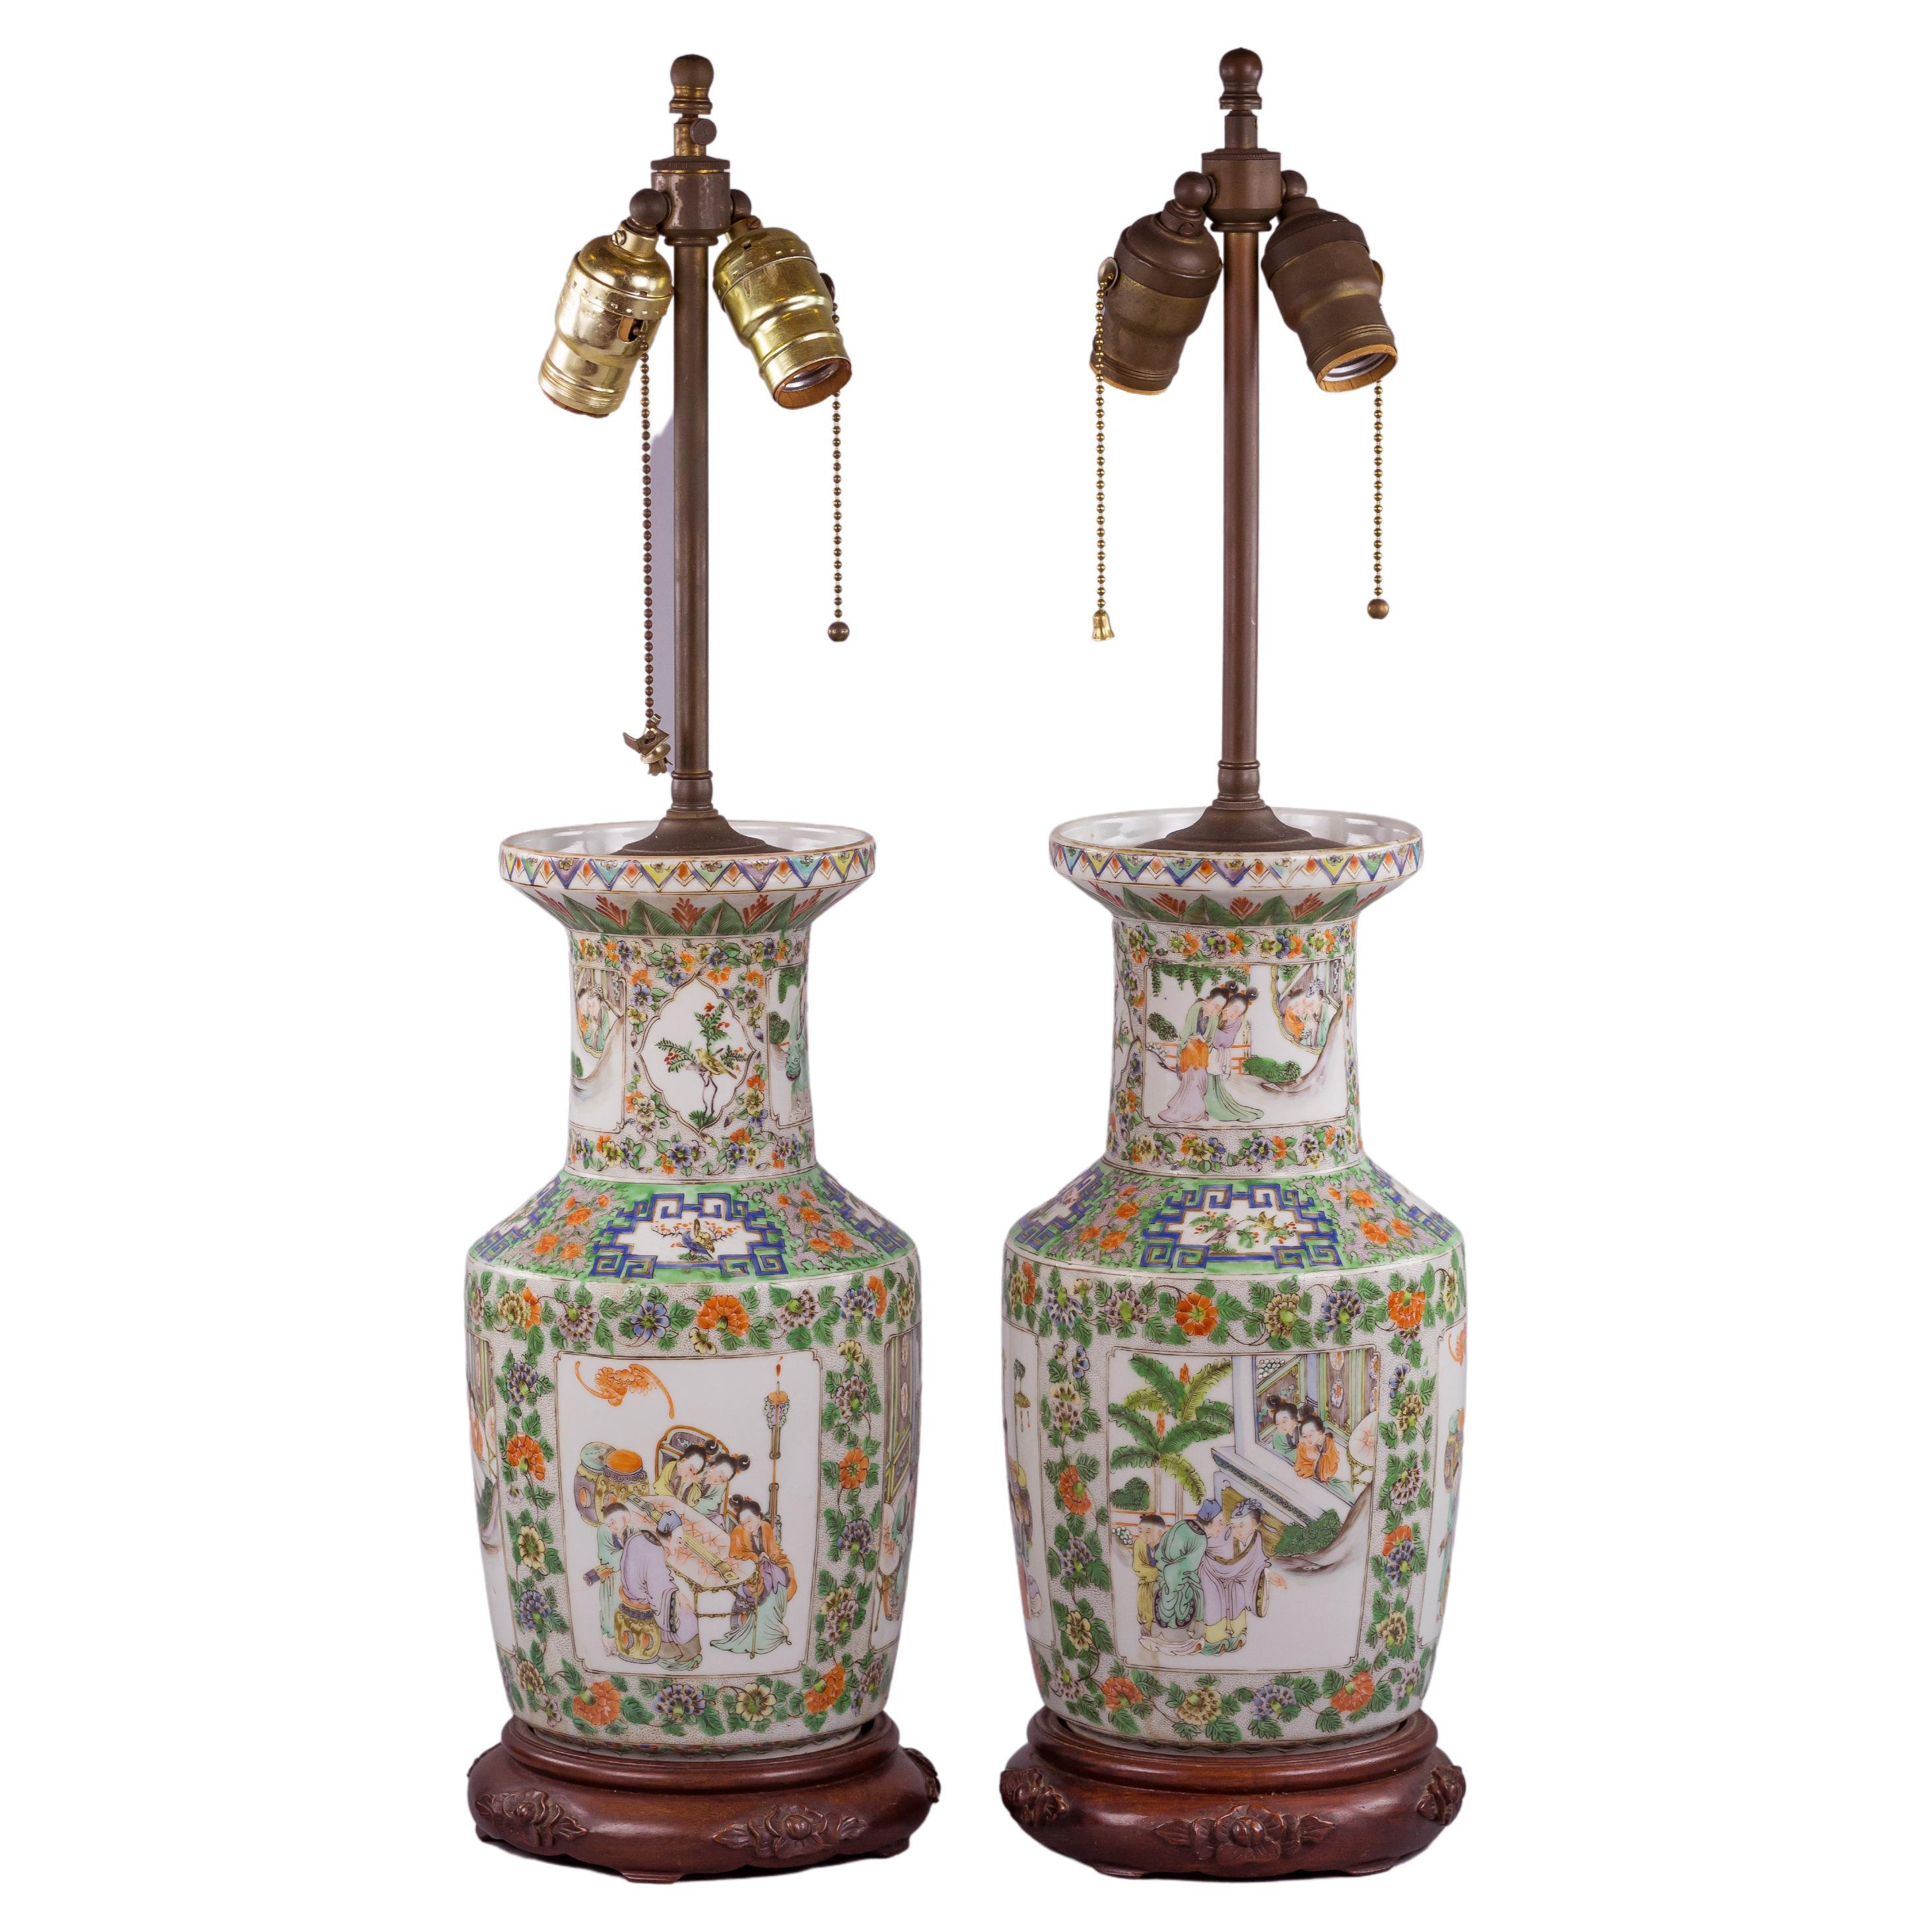 Pair of Chinese Porcelain Canton Famille Rose Vase Mounted as Lamps, 19 Century